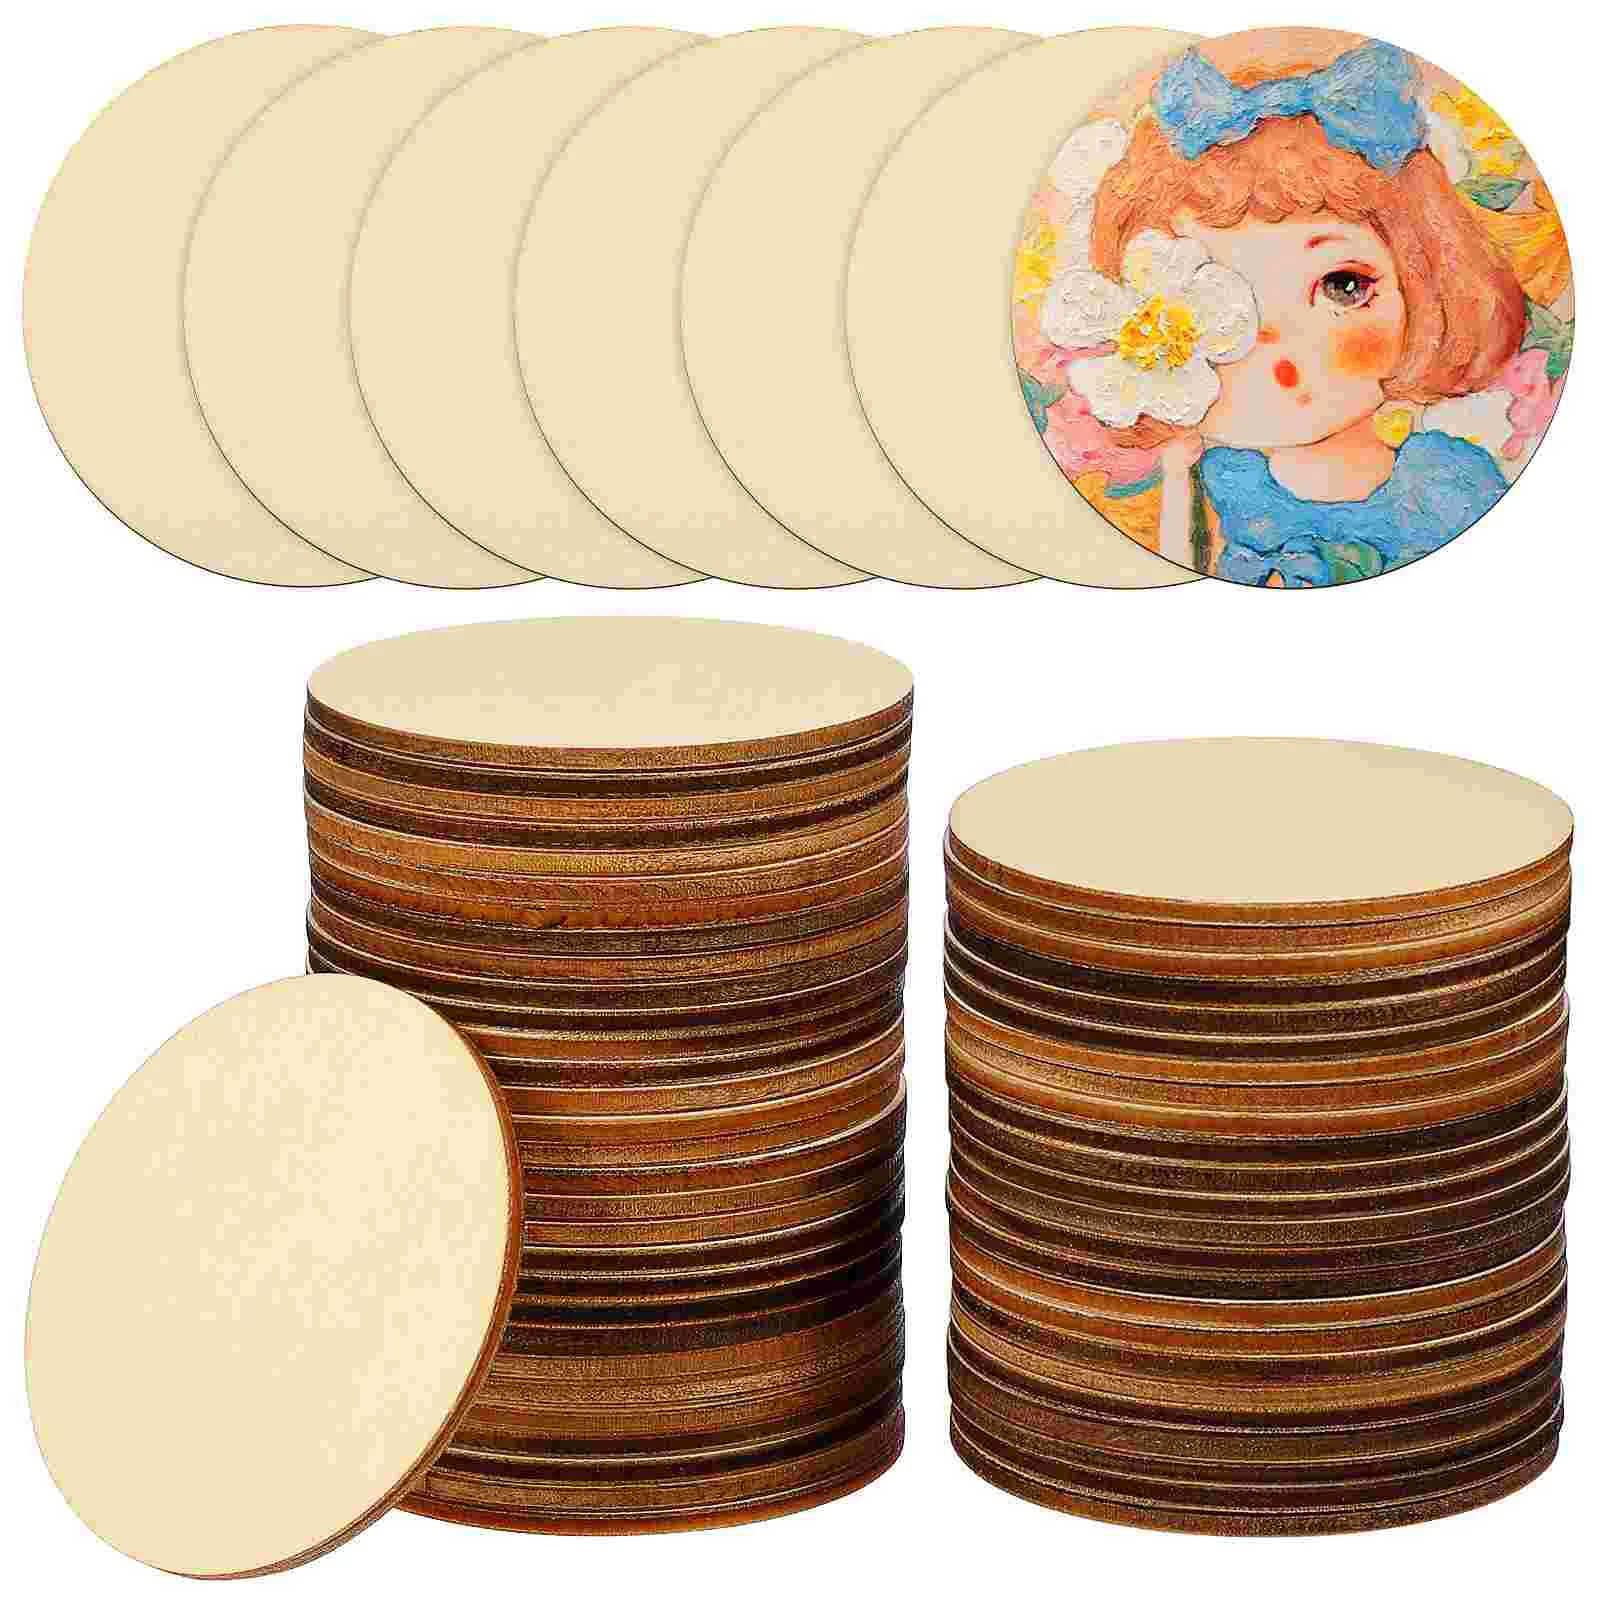 

Wood Wooden Pieces Craft Unfinished Discs Slices Round Crafts Diy Circles Blank Centerpieces Painting Cutouts Chips Ornaments